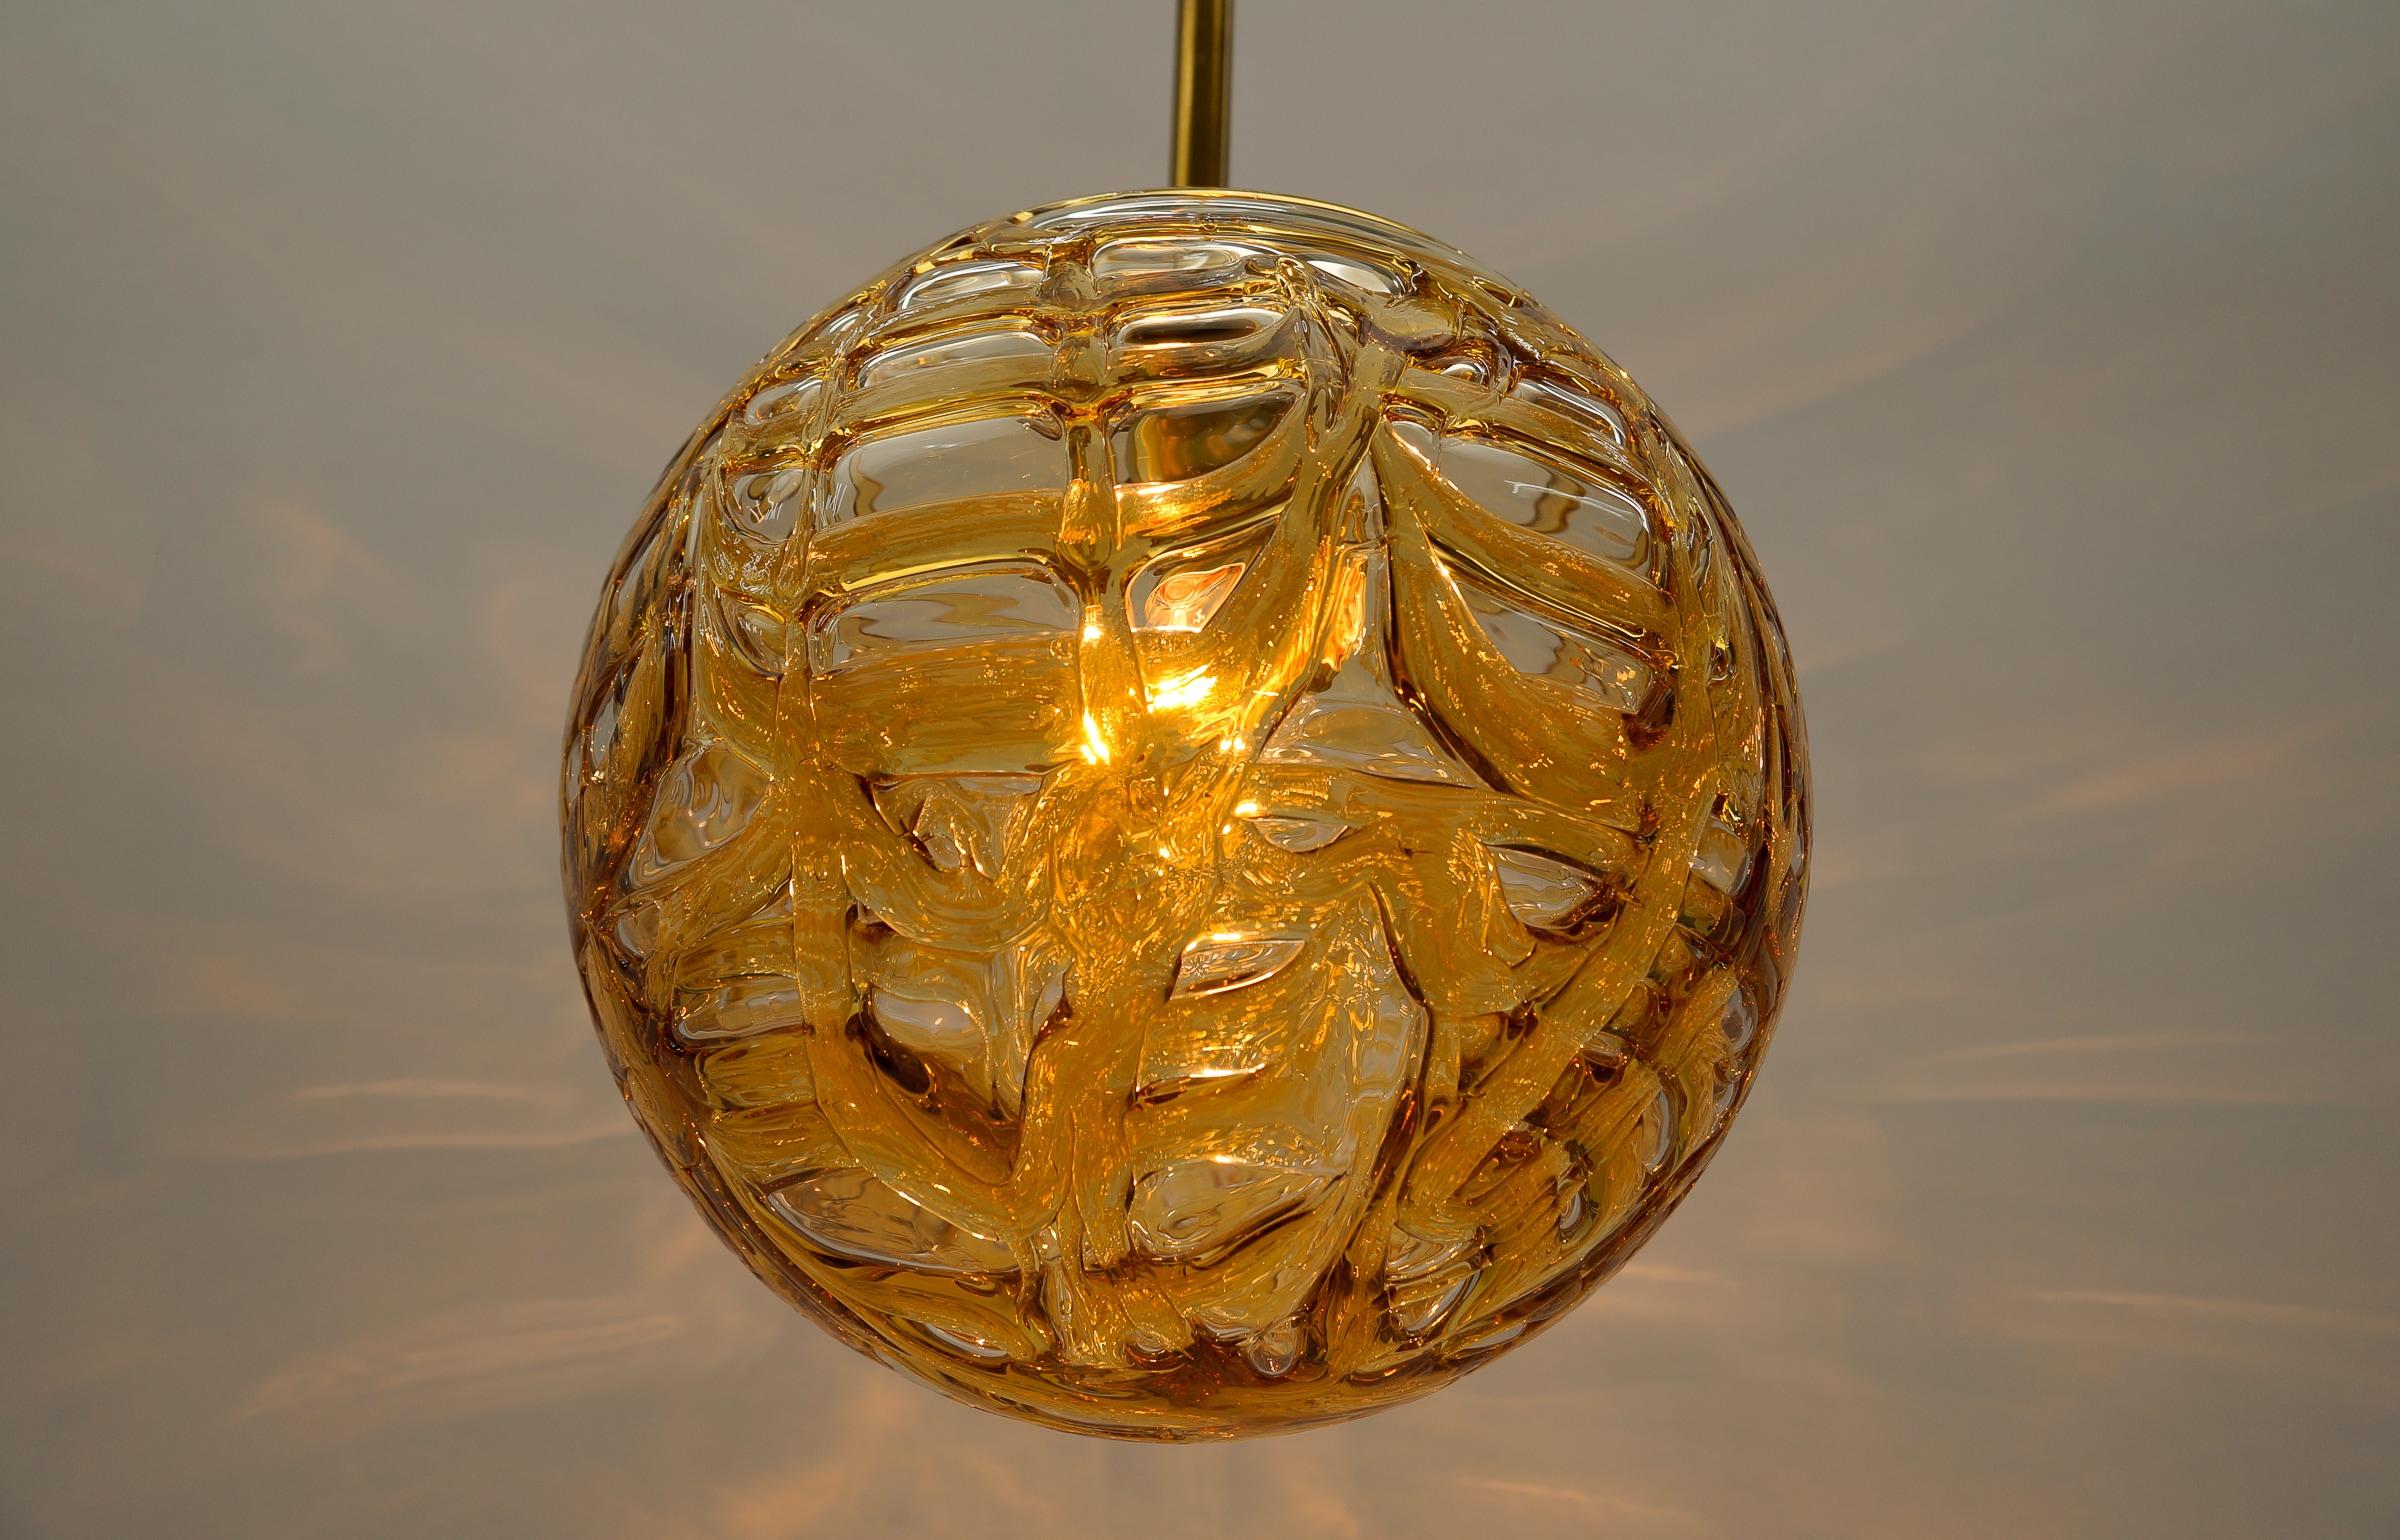 Yellow Murano Glass Ball Pendant Lamp by Doria, - 1960s Germany For Sale 2